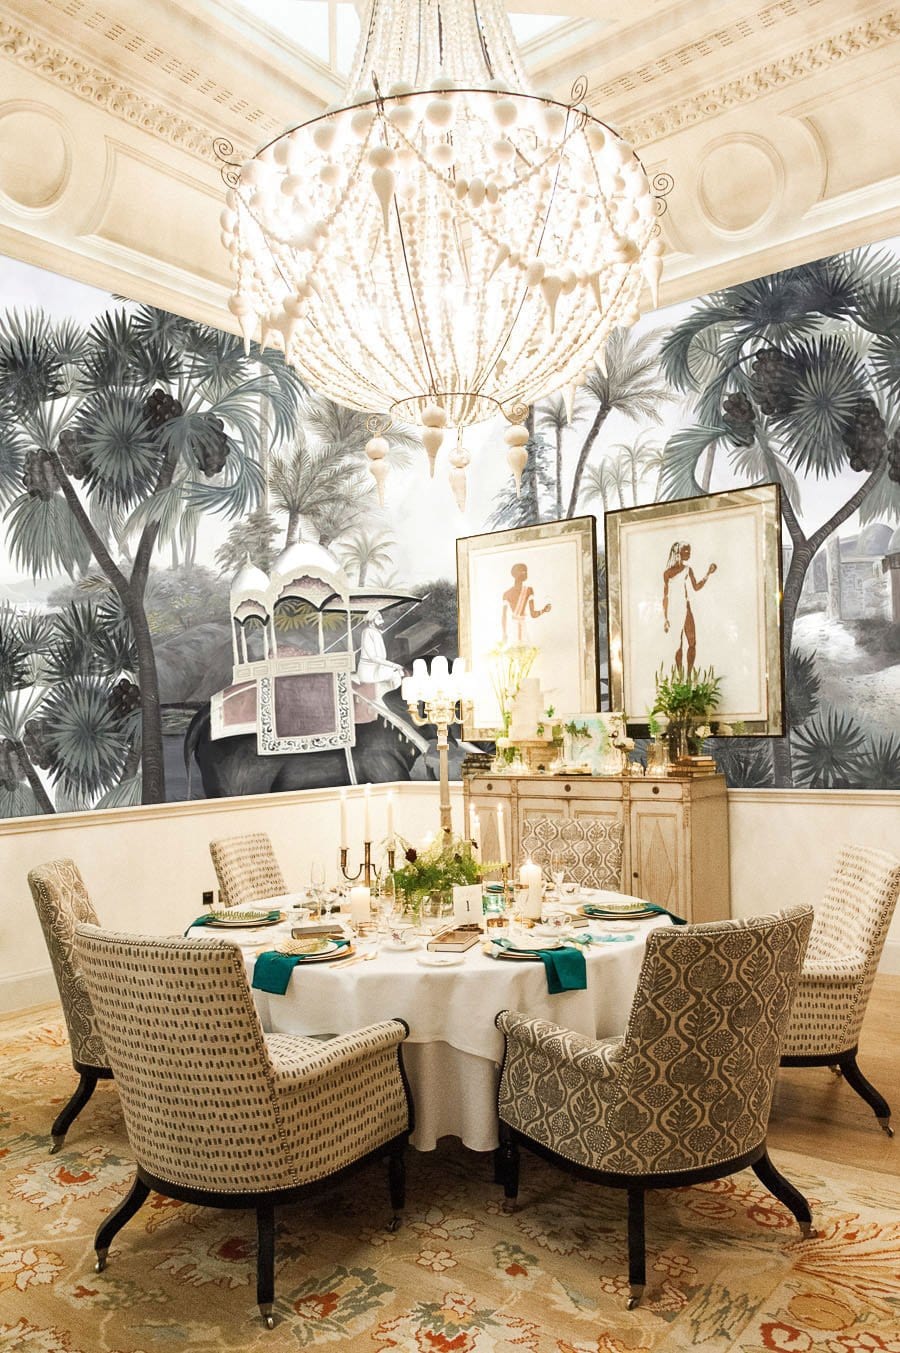 wallpaper mural with an elephant in the jungle for use in decorating the dining room.